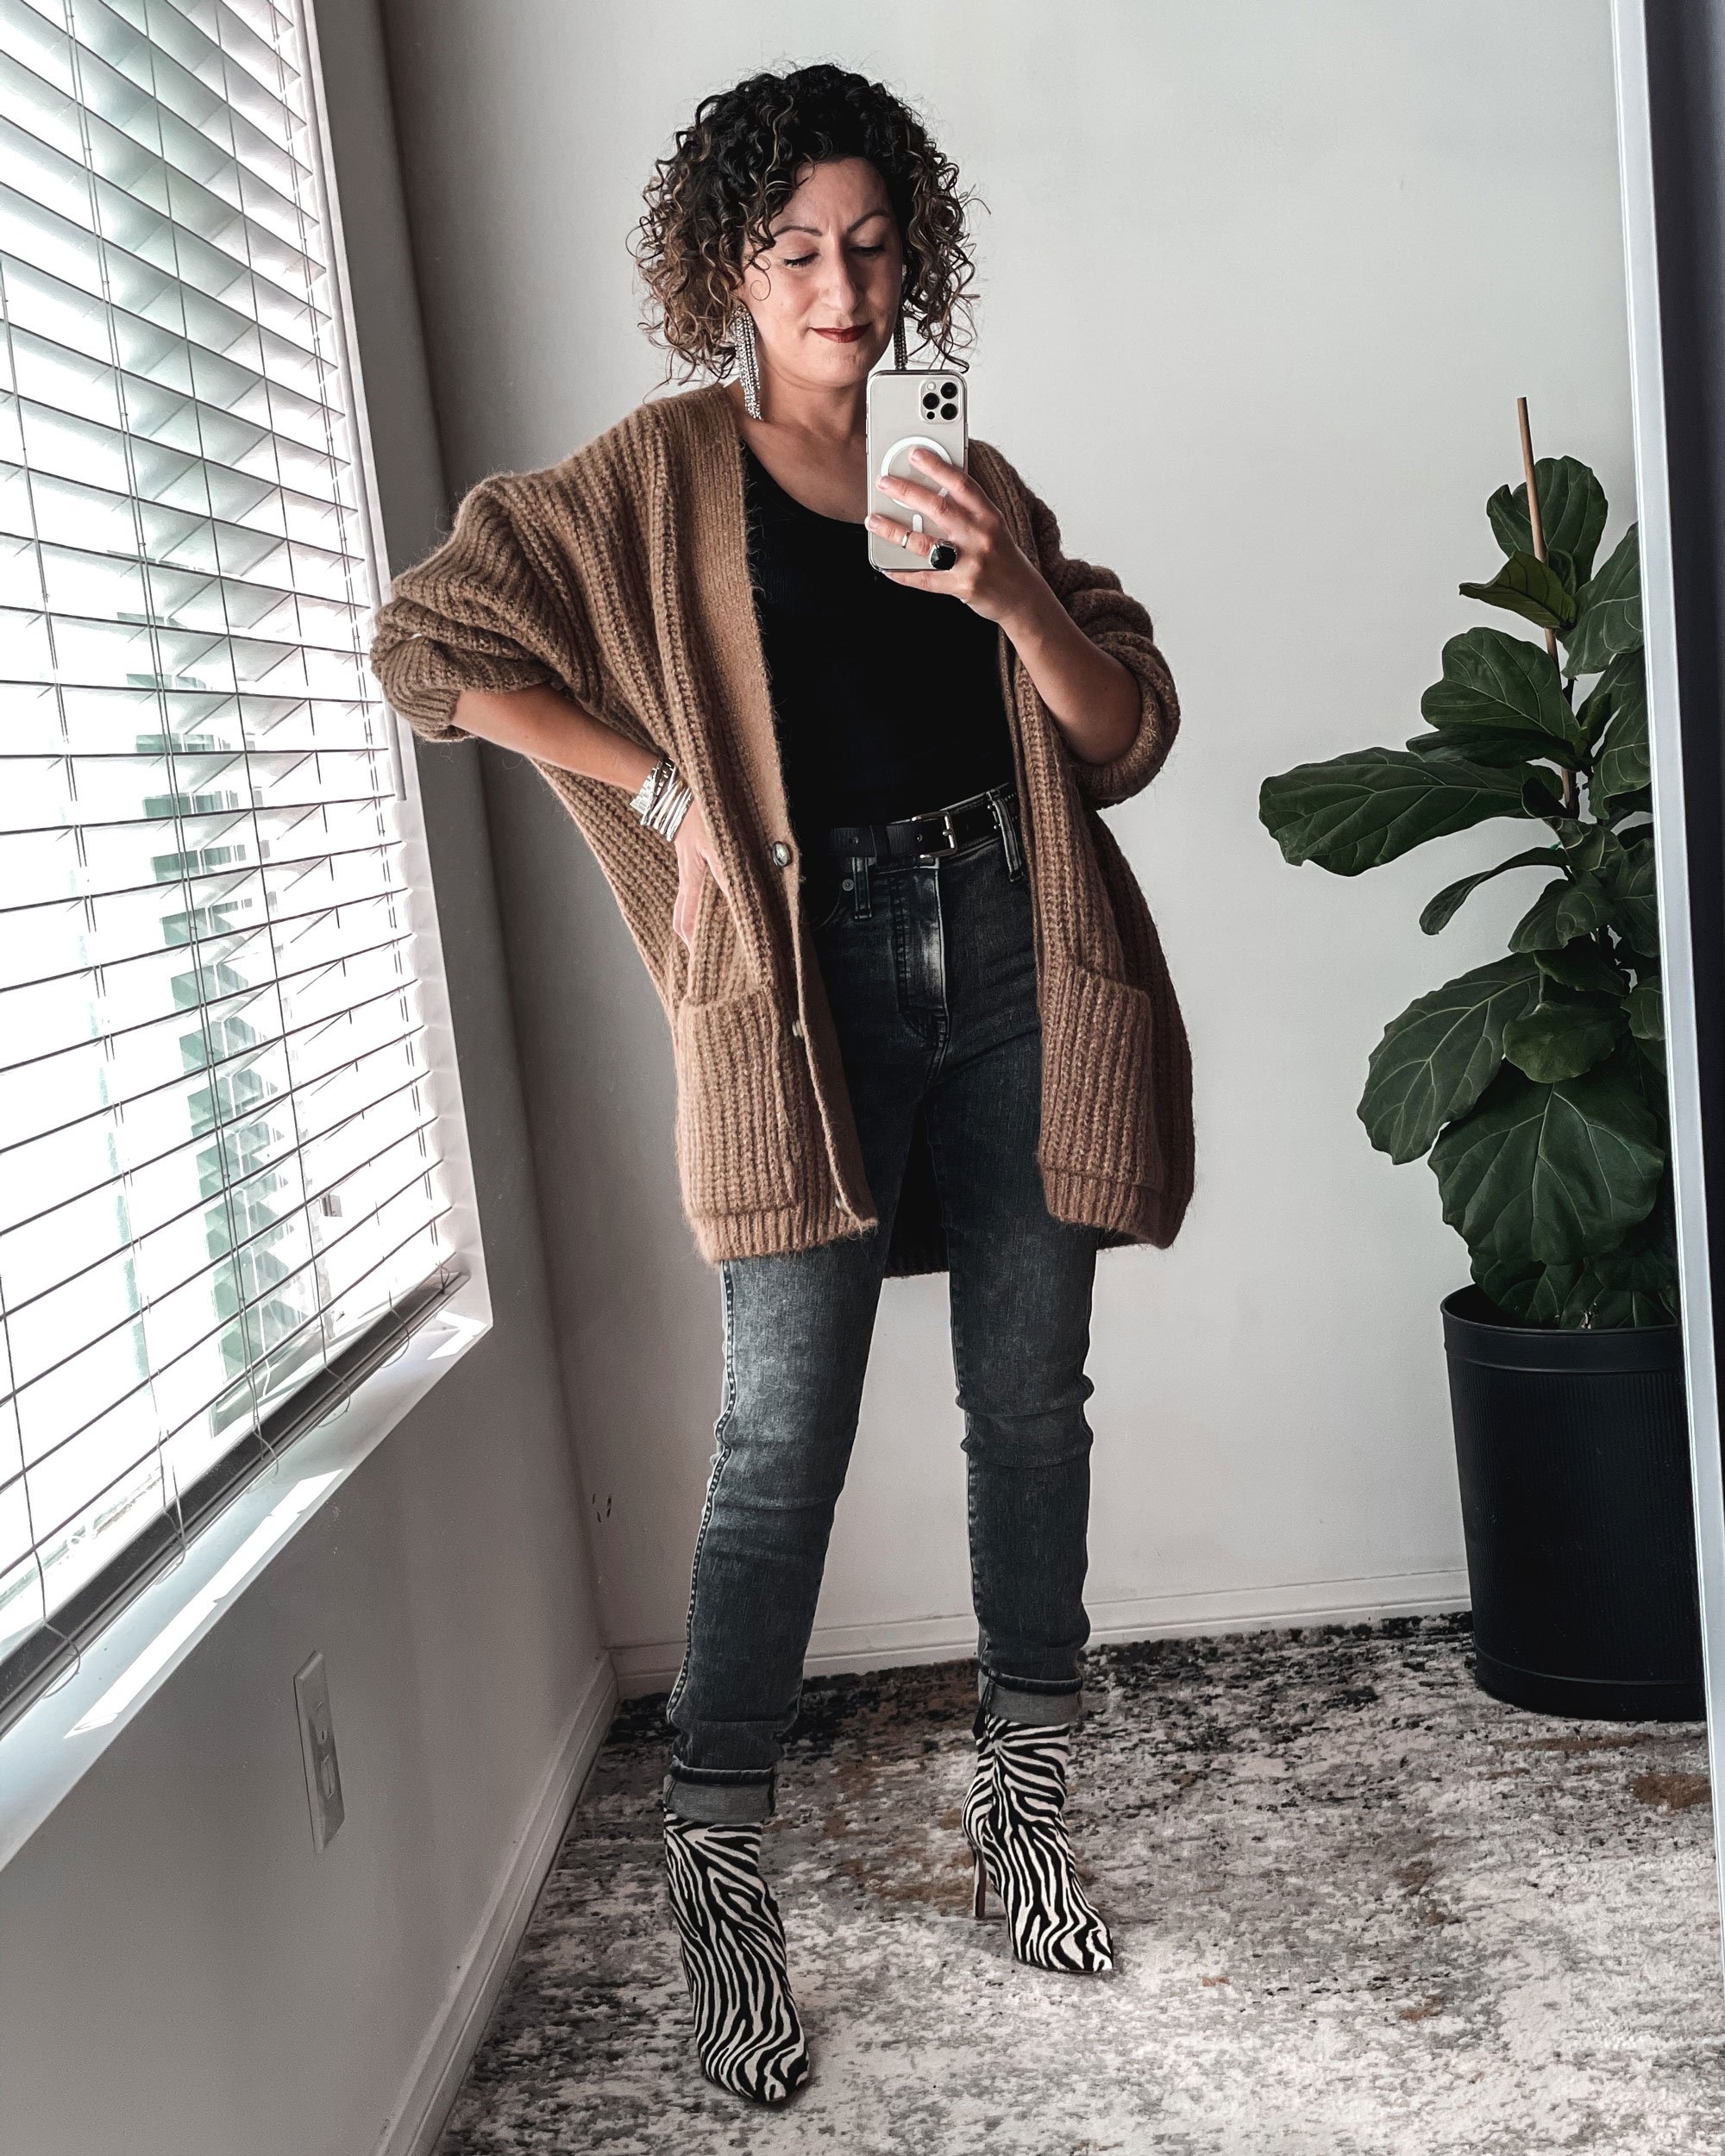 Zara and Madewell Purchases